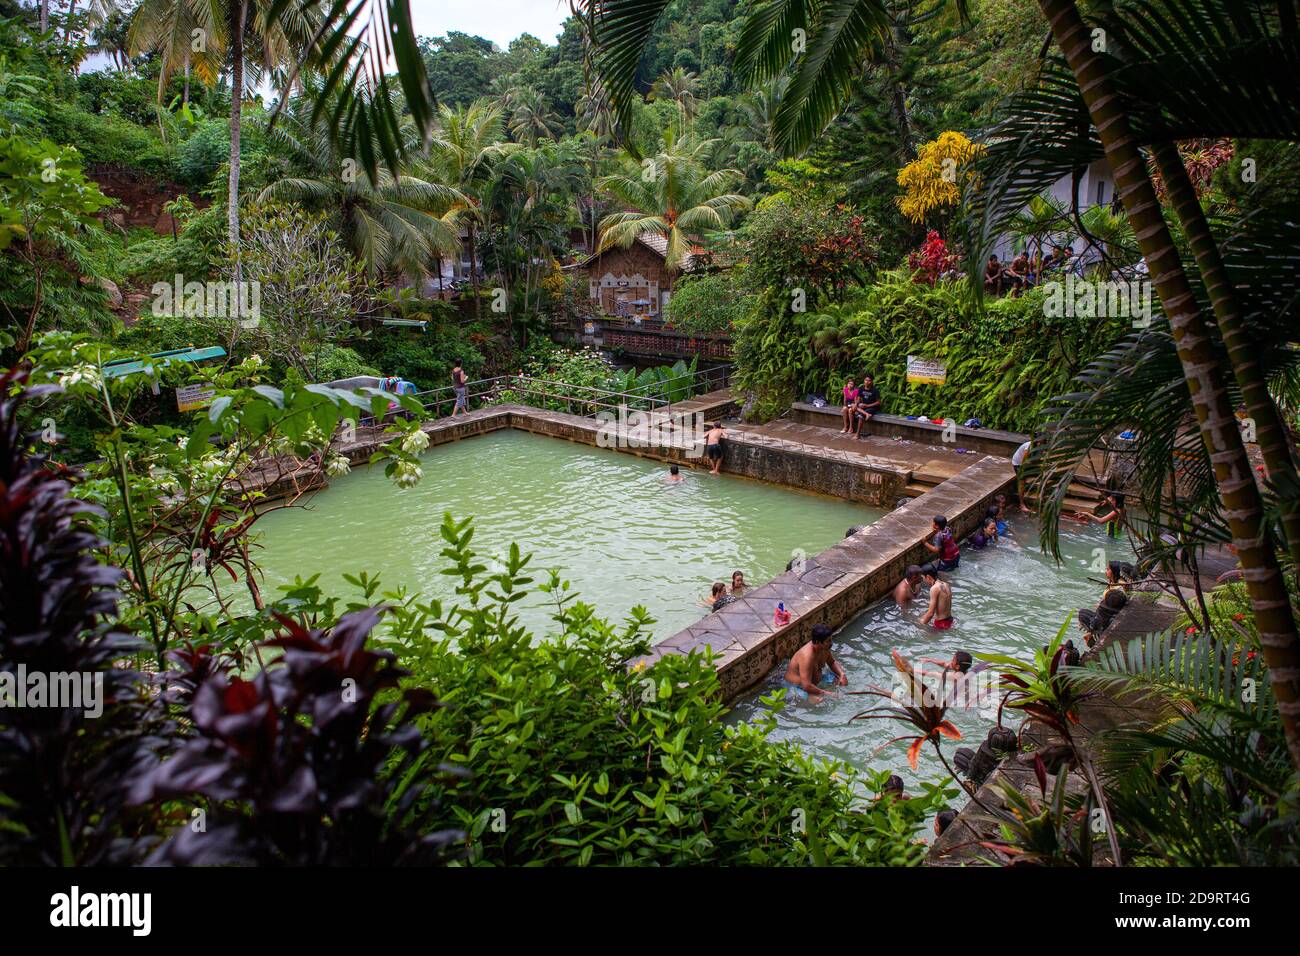 Banjar, Bali / Indonesia - March 08 2013: Locals and international visitors taking shower under famous sulphuric water in centuries-old Banjar Hot Stock Photo